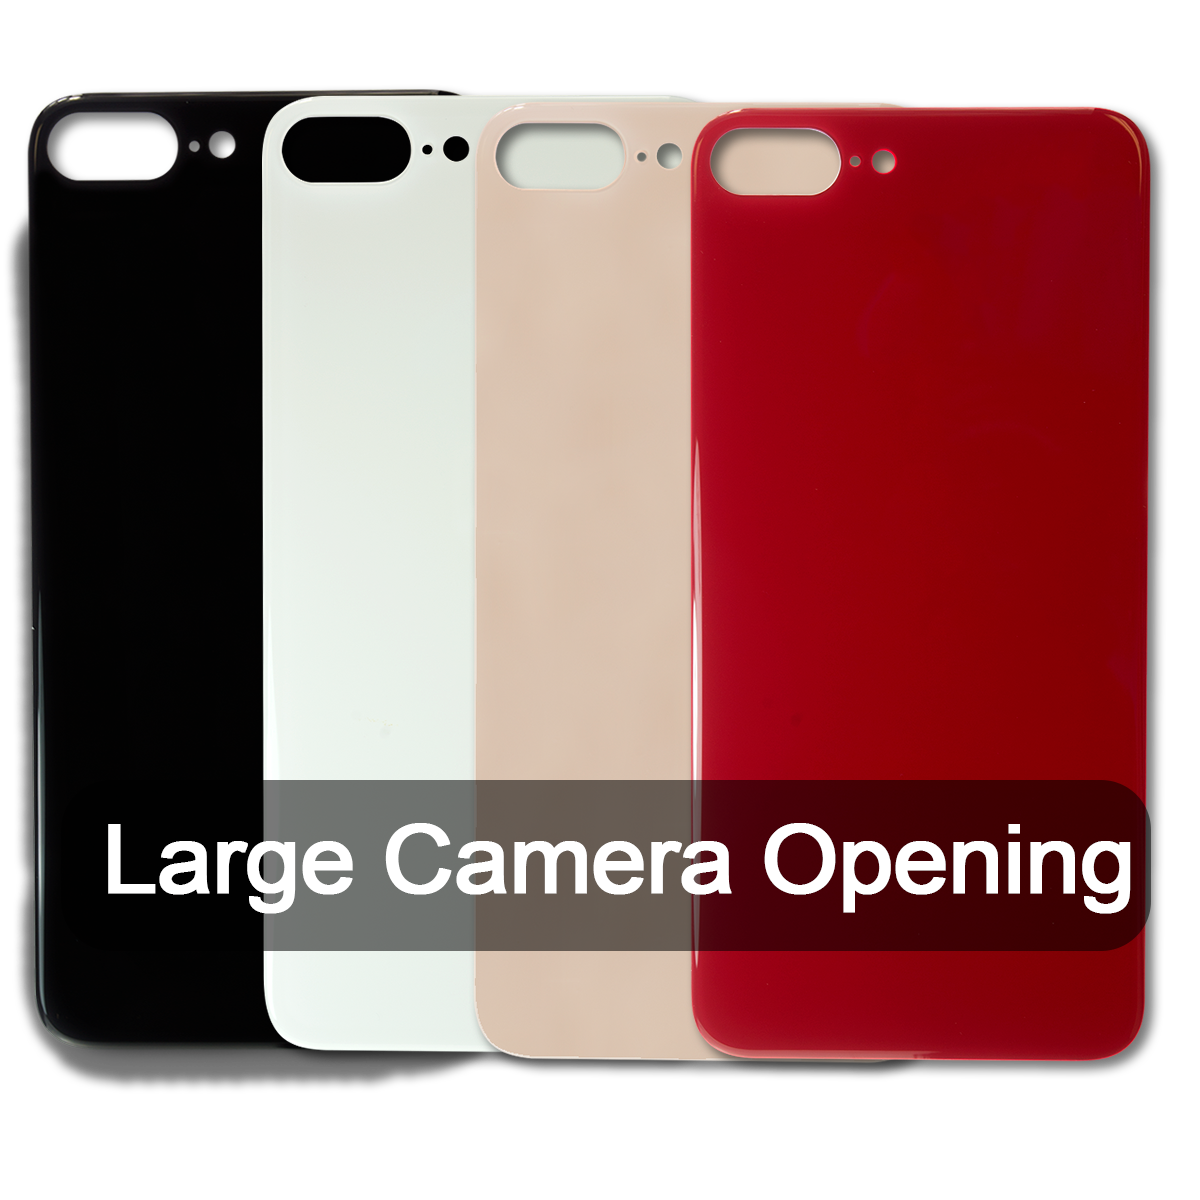 iPhone 8 Plus Rear Glass Cover Replacement with Large Camera Opening